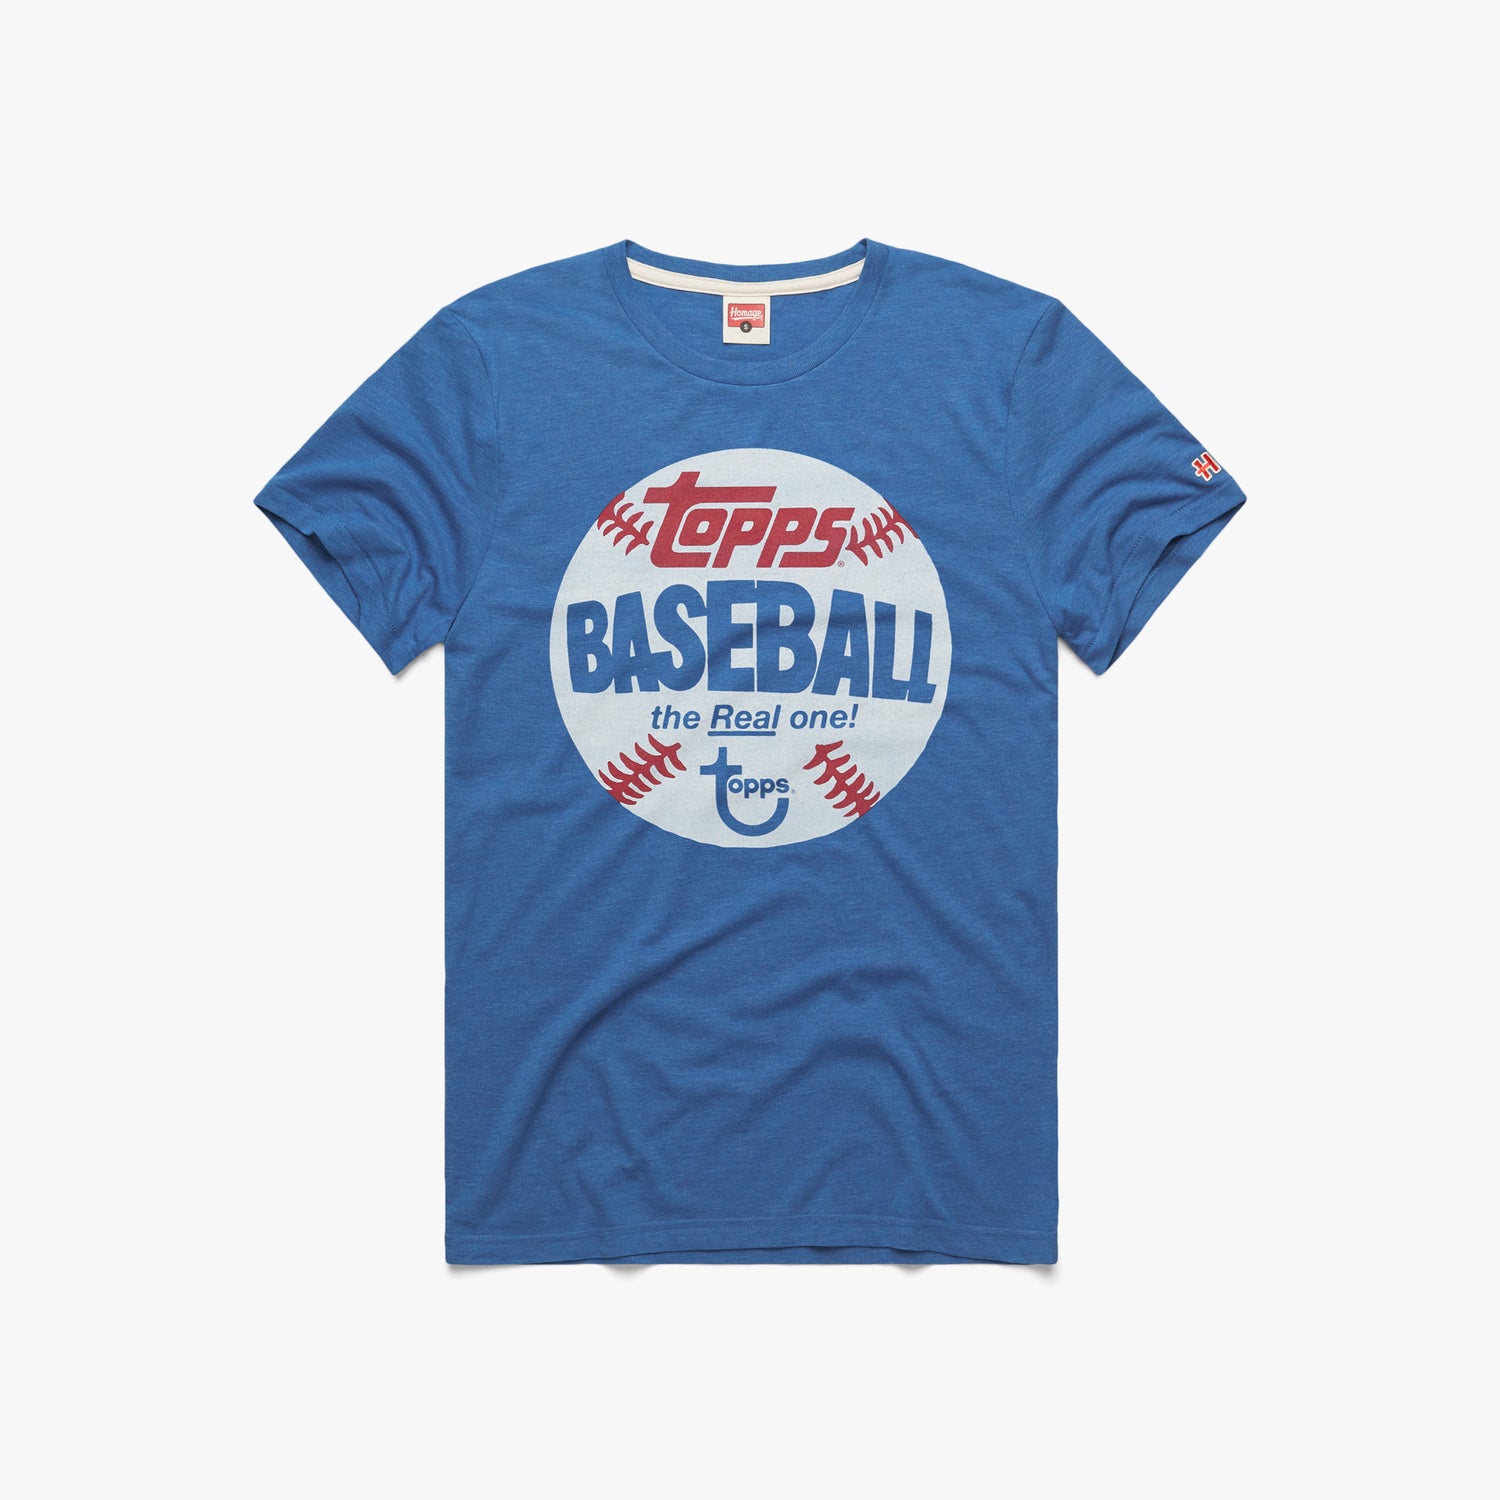 Dodgers Jackie Robinson 42 T-Shirt from Homage. | Ash | Vintage Apparel from Homage.